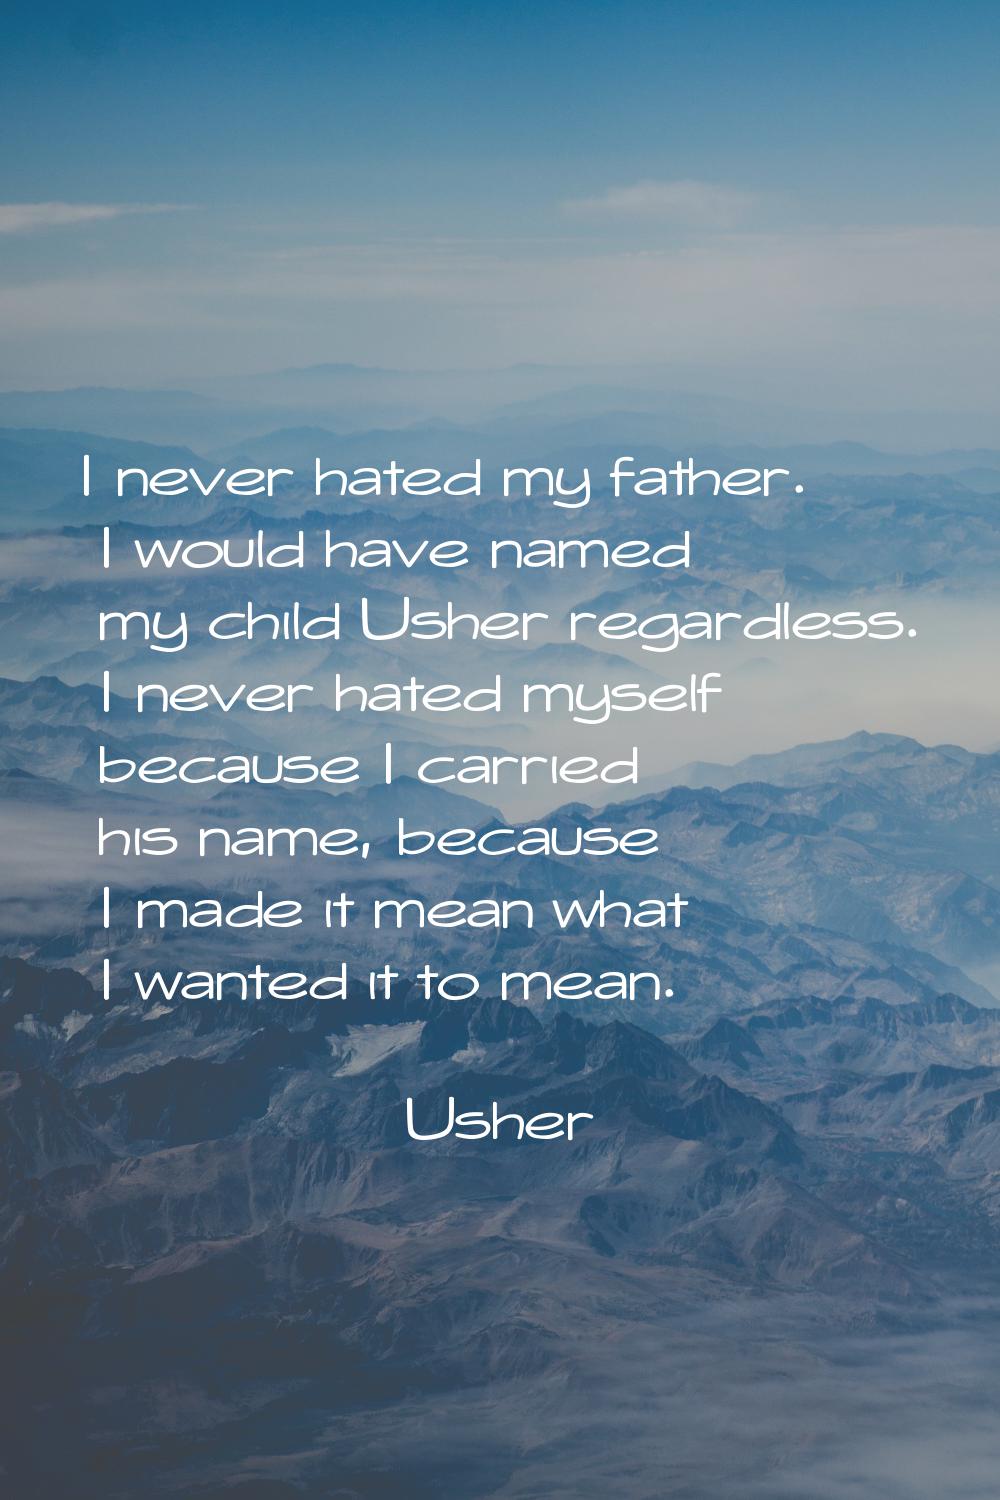 I never hated my father. I would have named my child Usher regardless. I never hated myself because